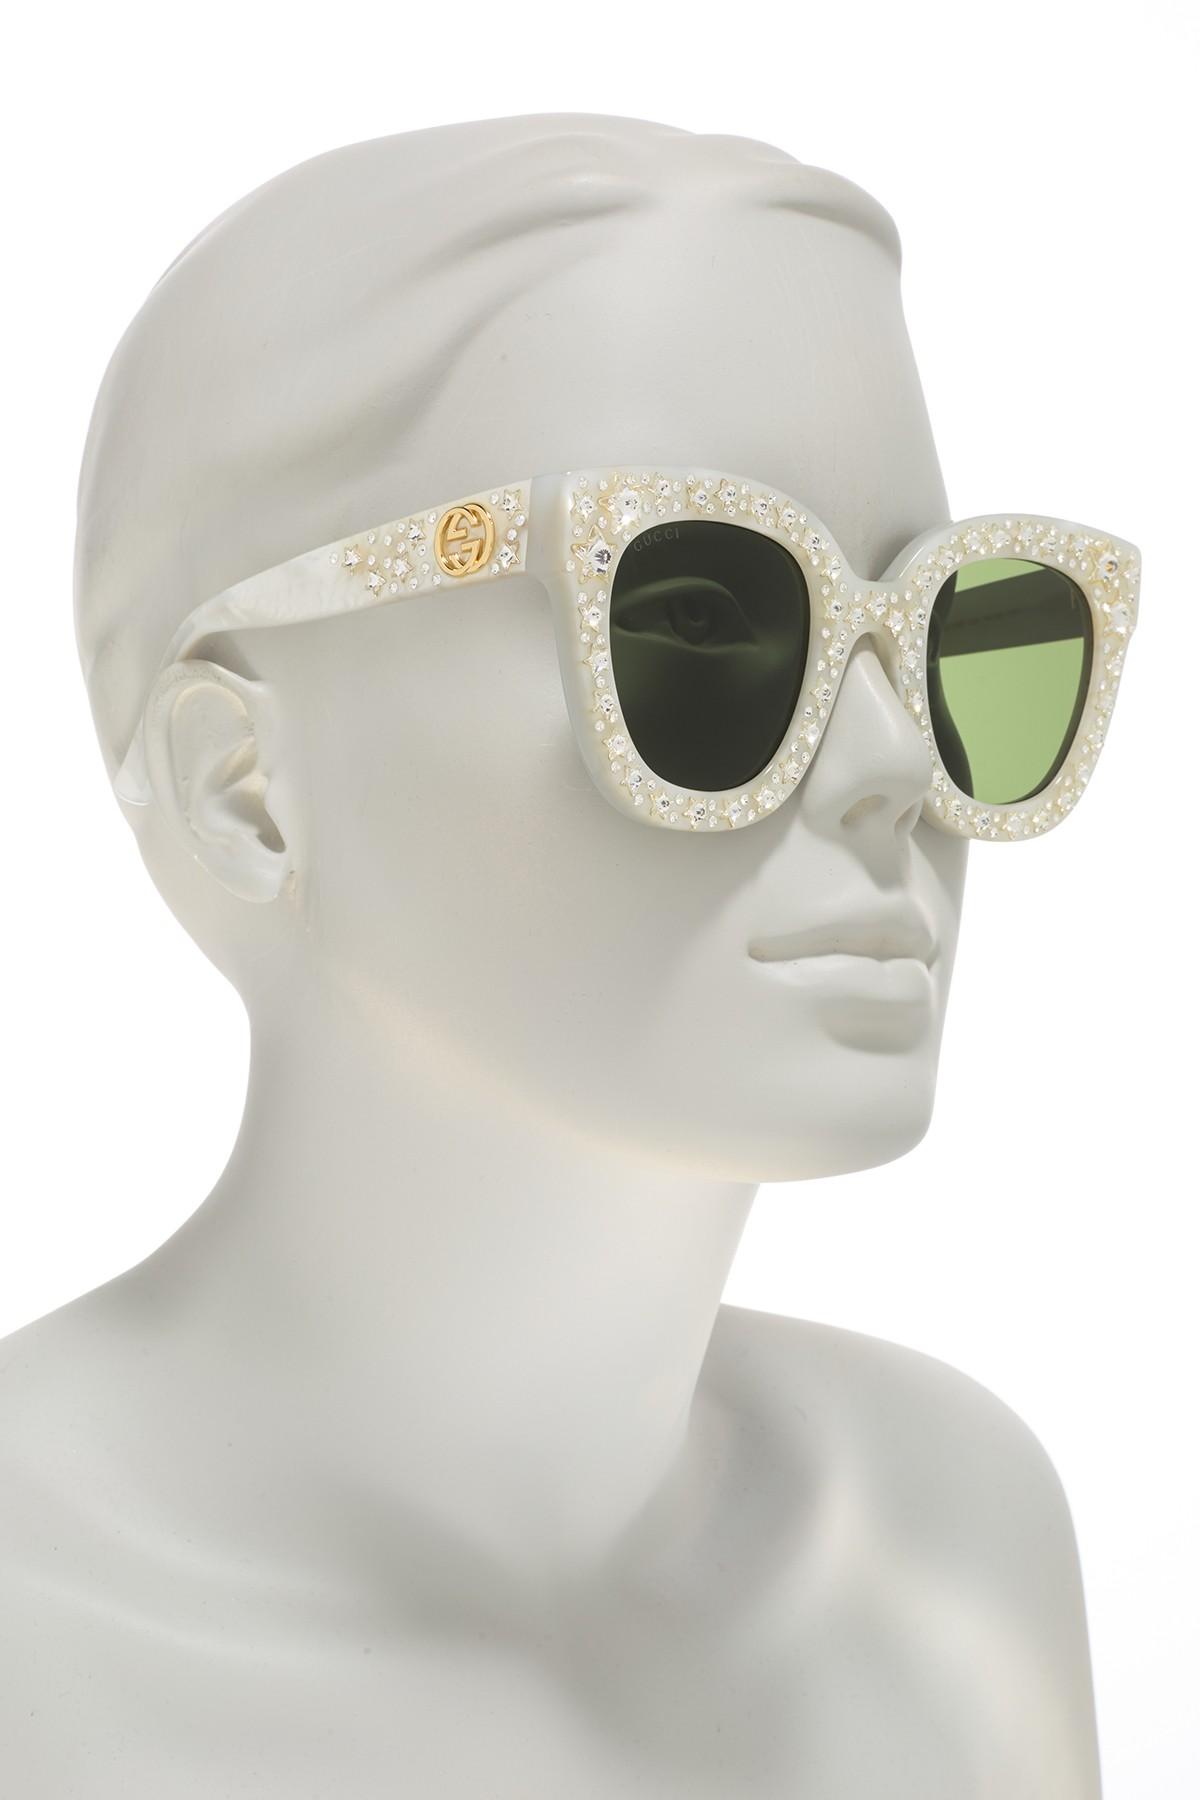 Gucci 49mm Crystal Star Sunglasses in White White Green (White) - Lyst